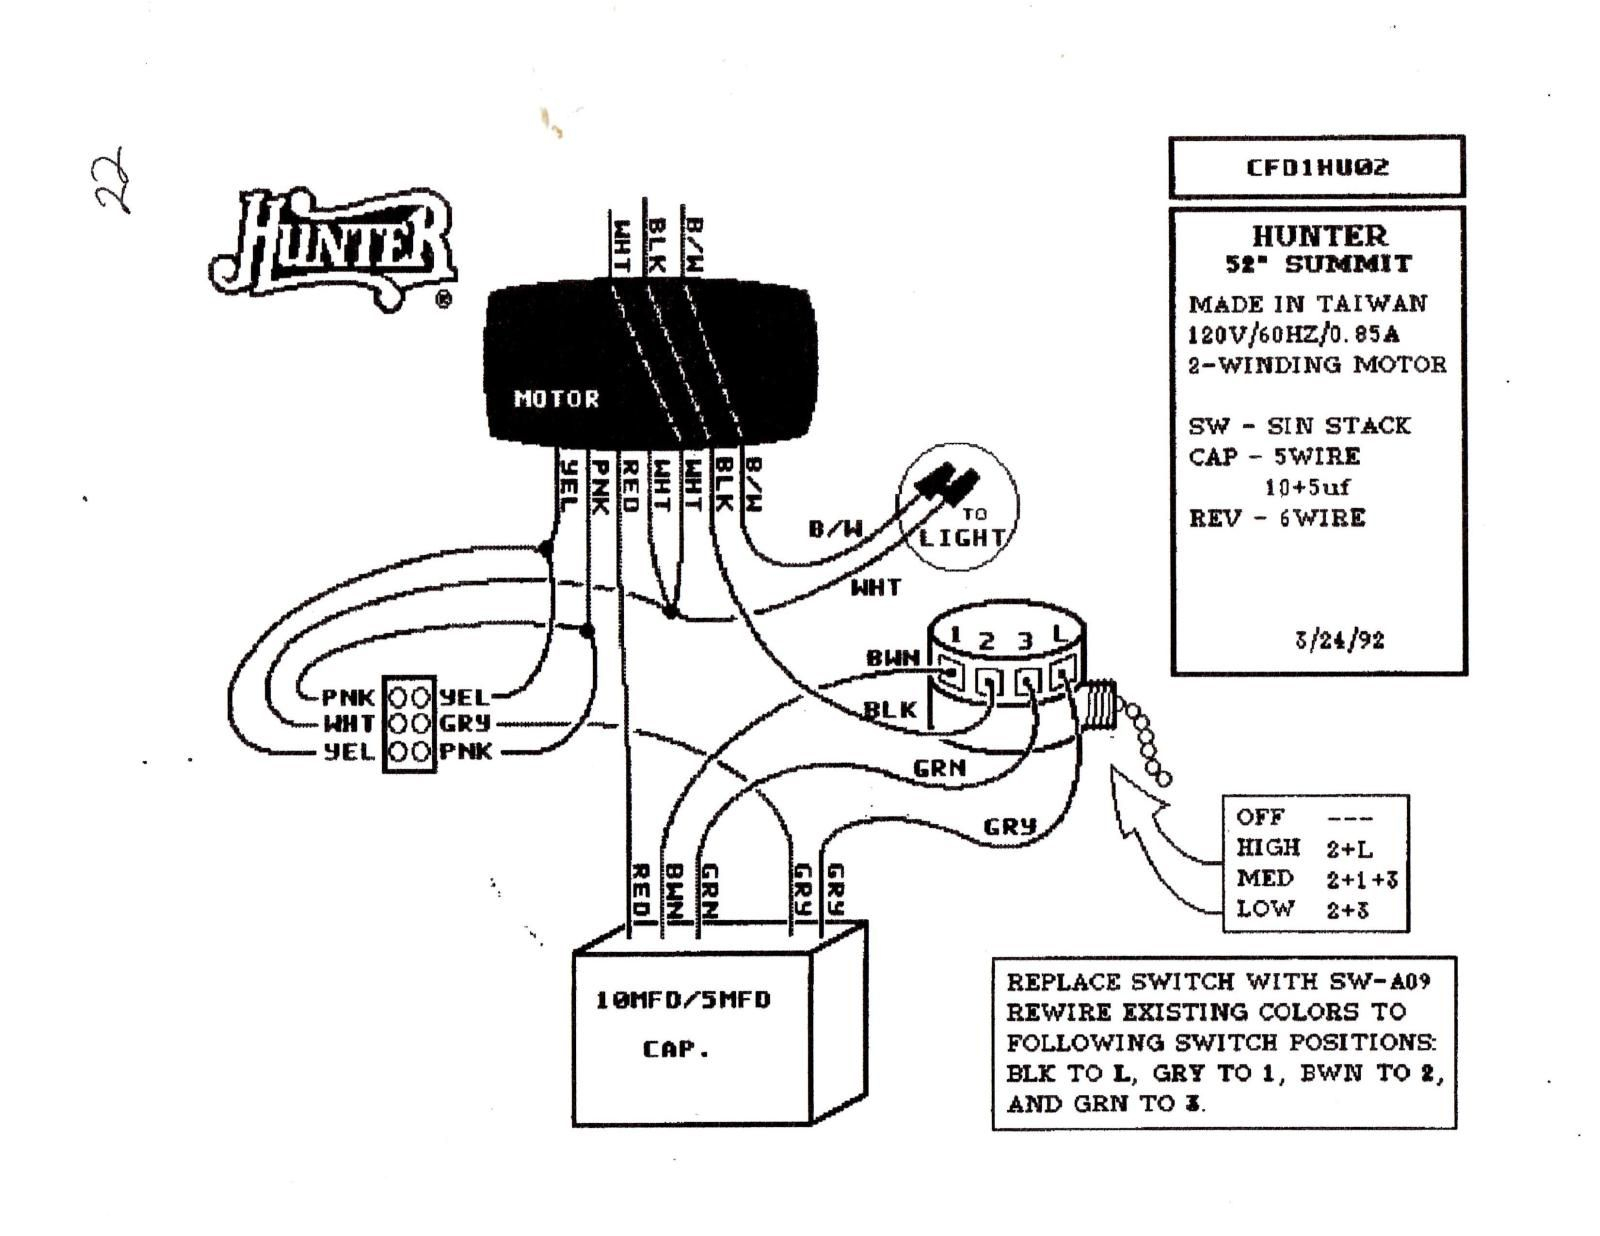 Jacobsen 628d Blade Switch Wiring Diagram For Power 82 Oldsmobile 98 Wiring Diagram Toshiba 1997wir Jeanjaures37 Fr